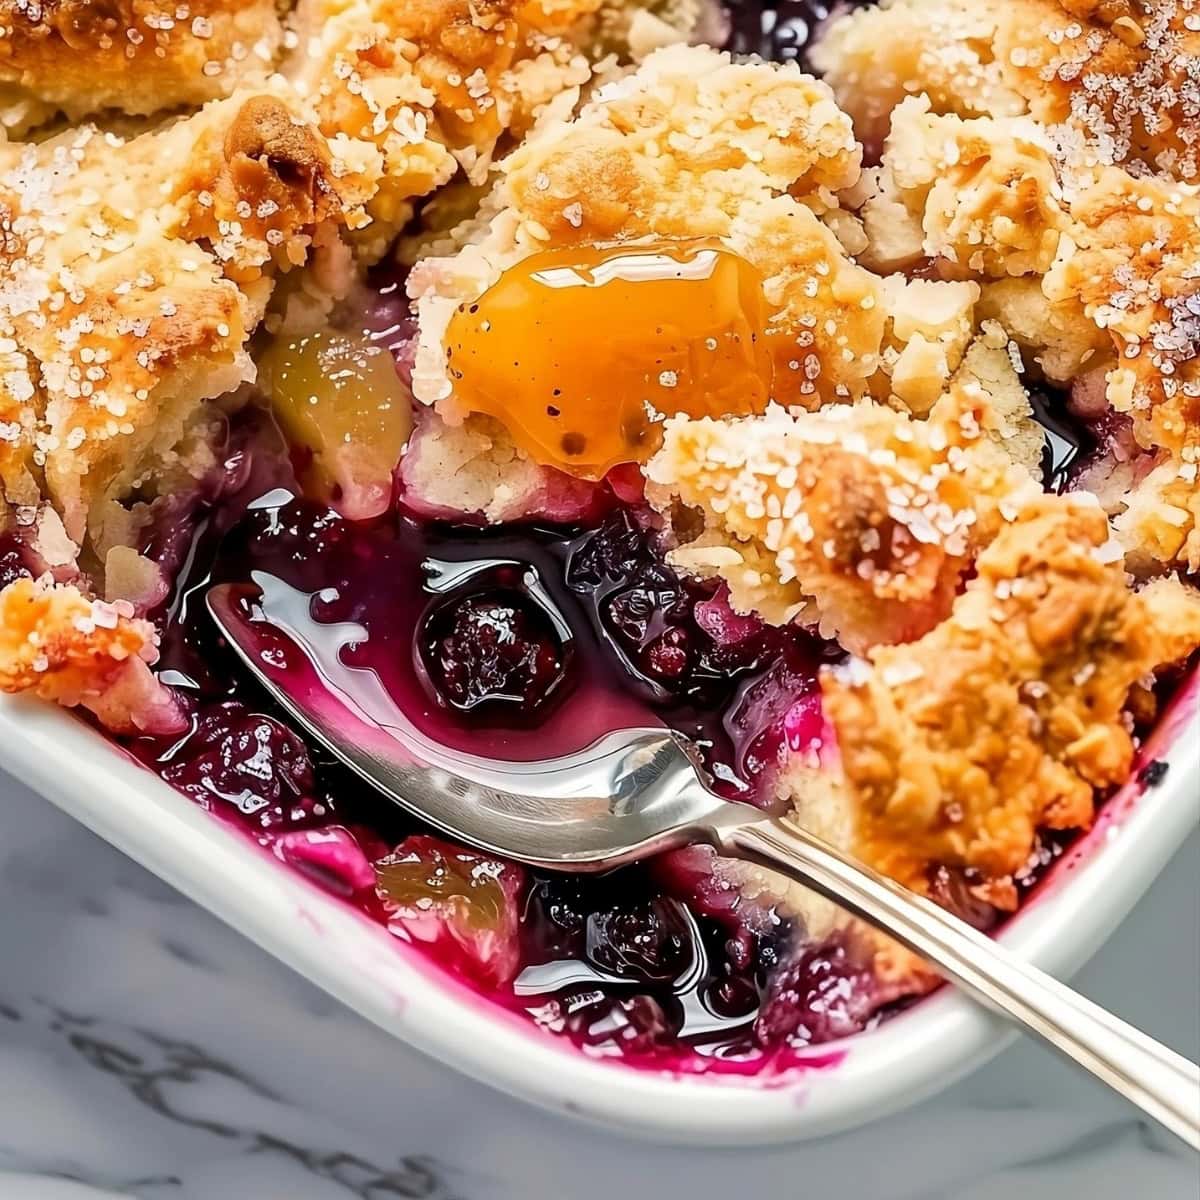 Blueberry and peach cobbler in a baking dish.